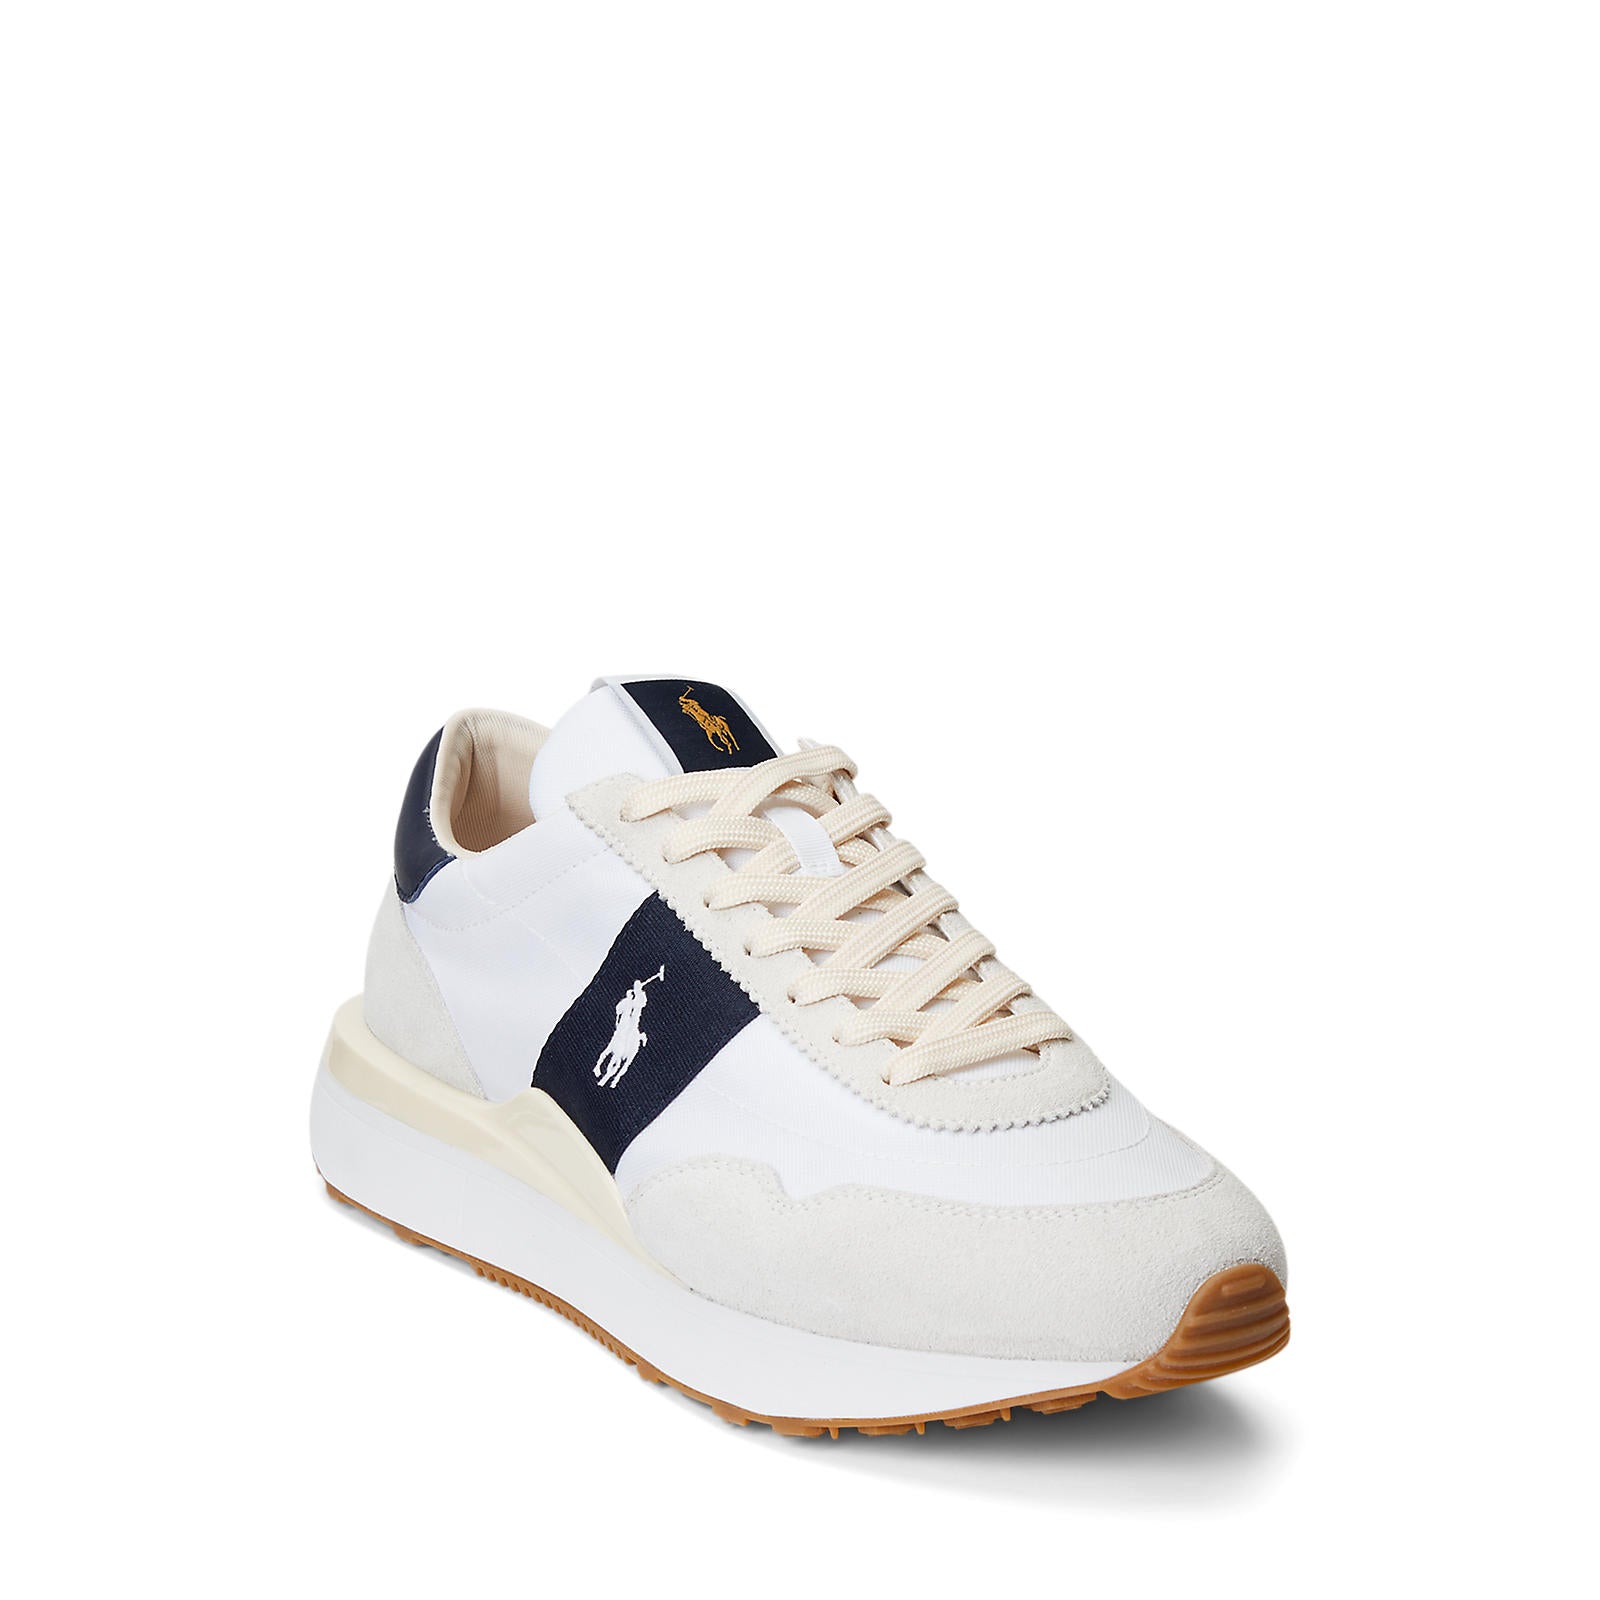 Train 89 PP - Sneakers - Low Top - White/Hunter – Blowes Clothing